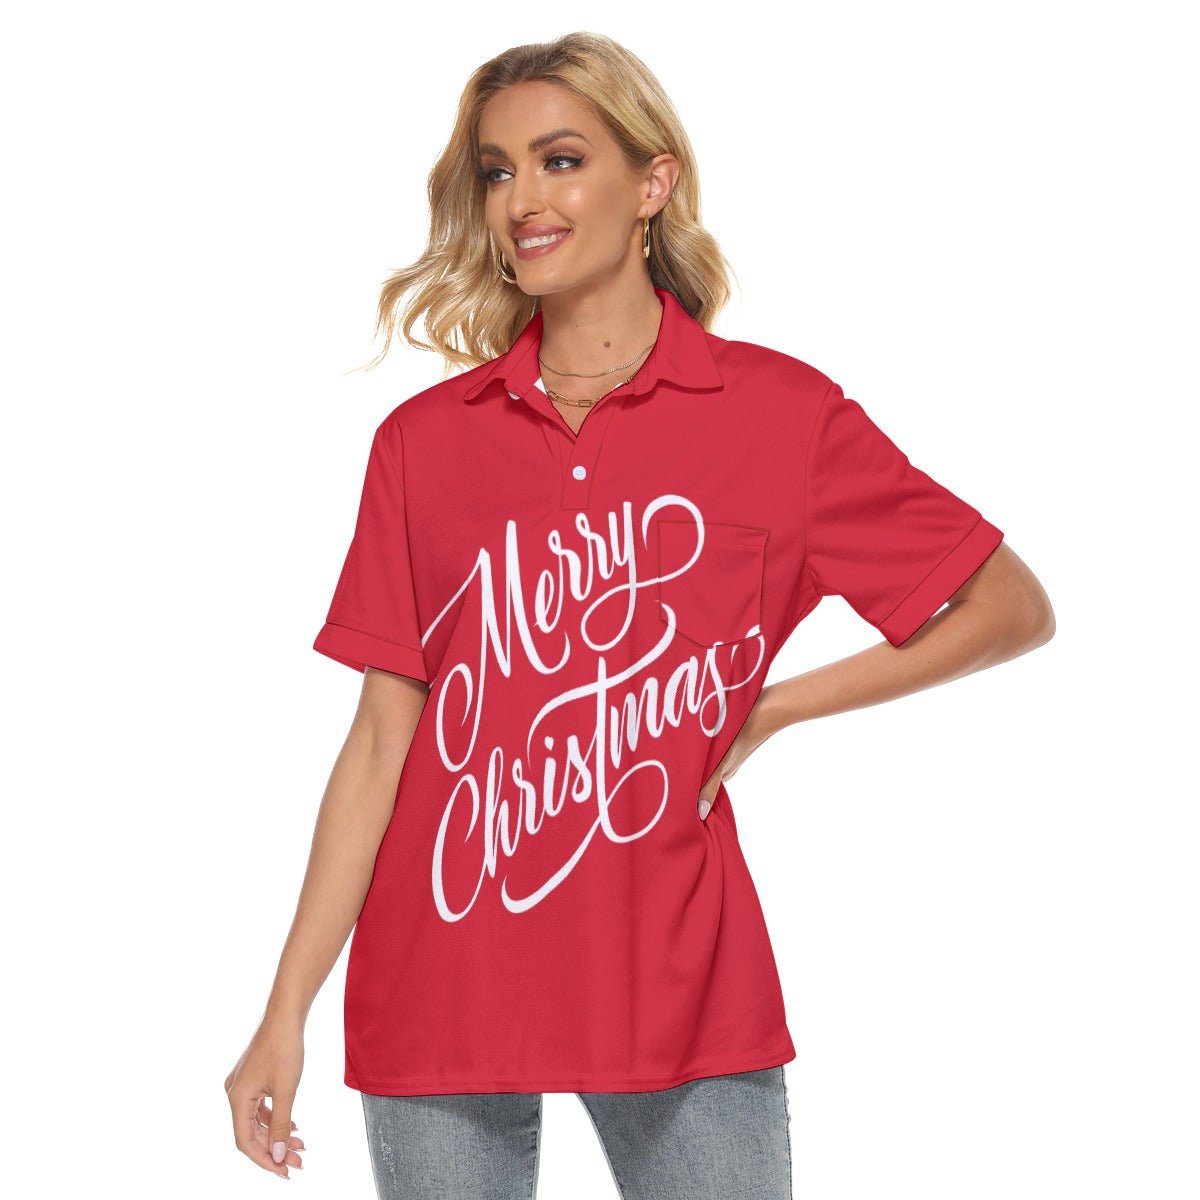 Women's Christmas Polo T-Shirt - Merry Christmas - Red - Festive Style